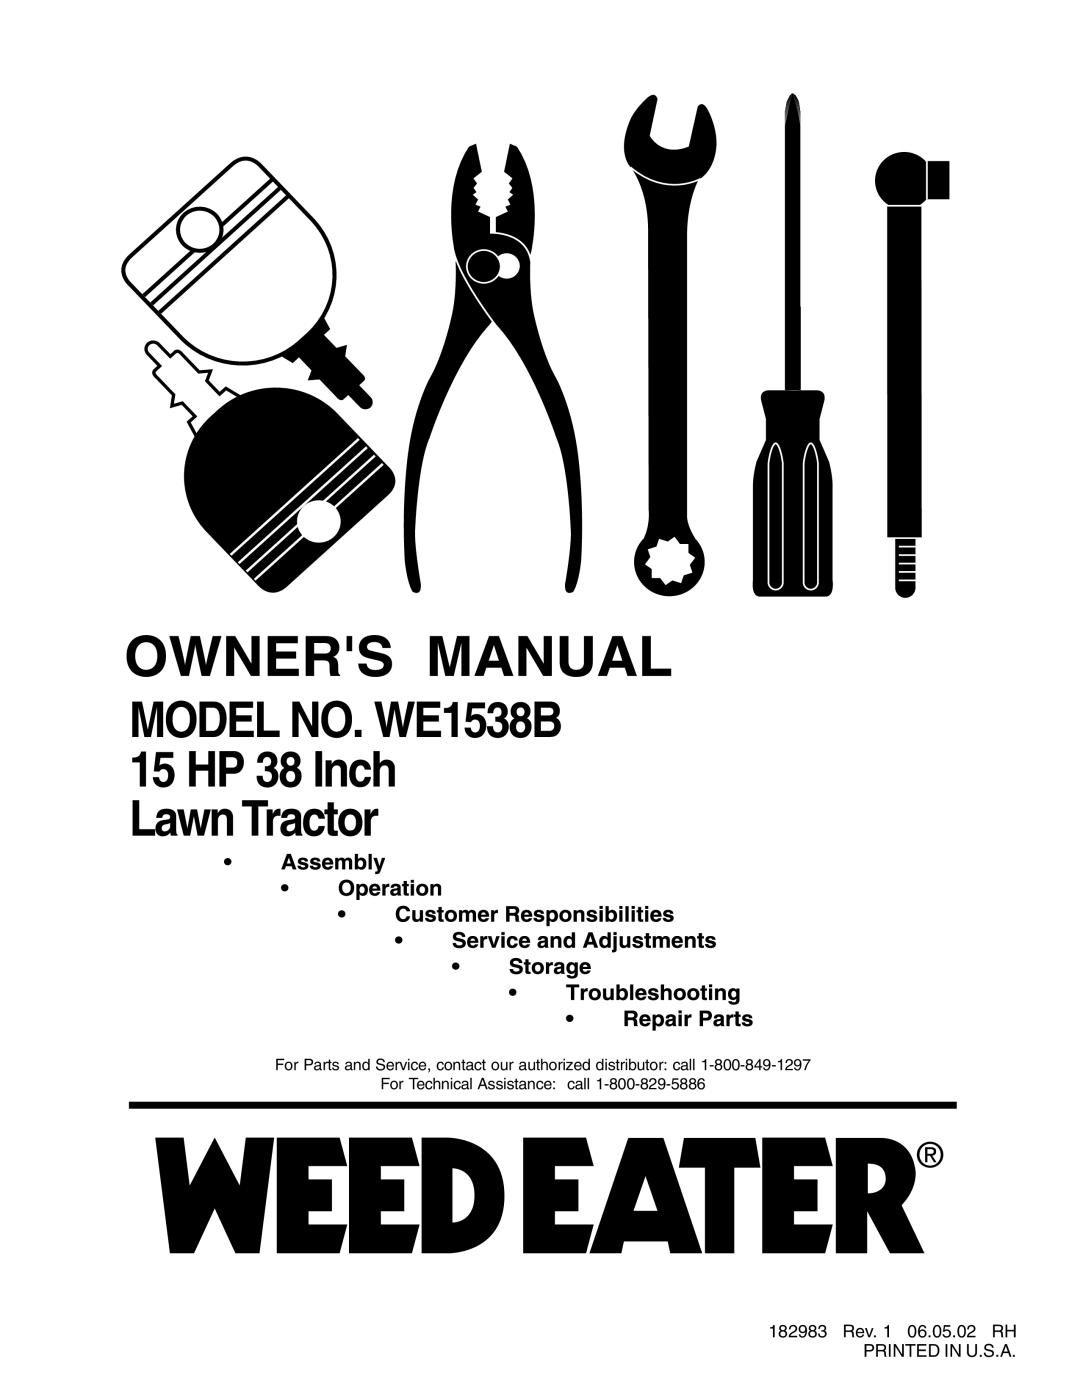 Weed Eater manual MODEL NO. WE1538B 15 HP 38 Inch Lawn Tractor 